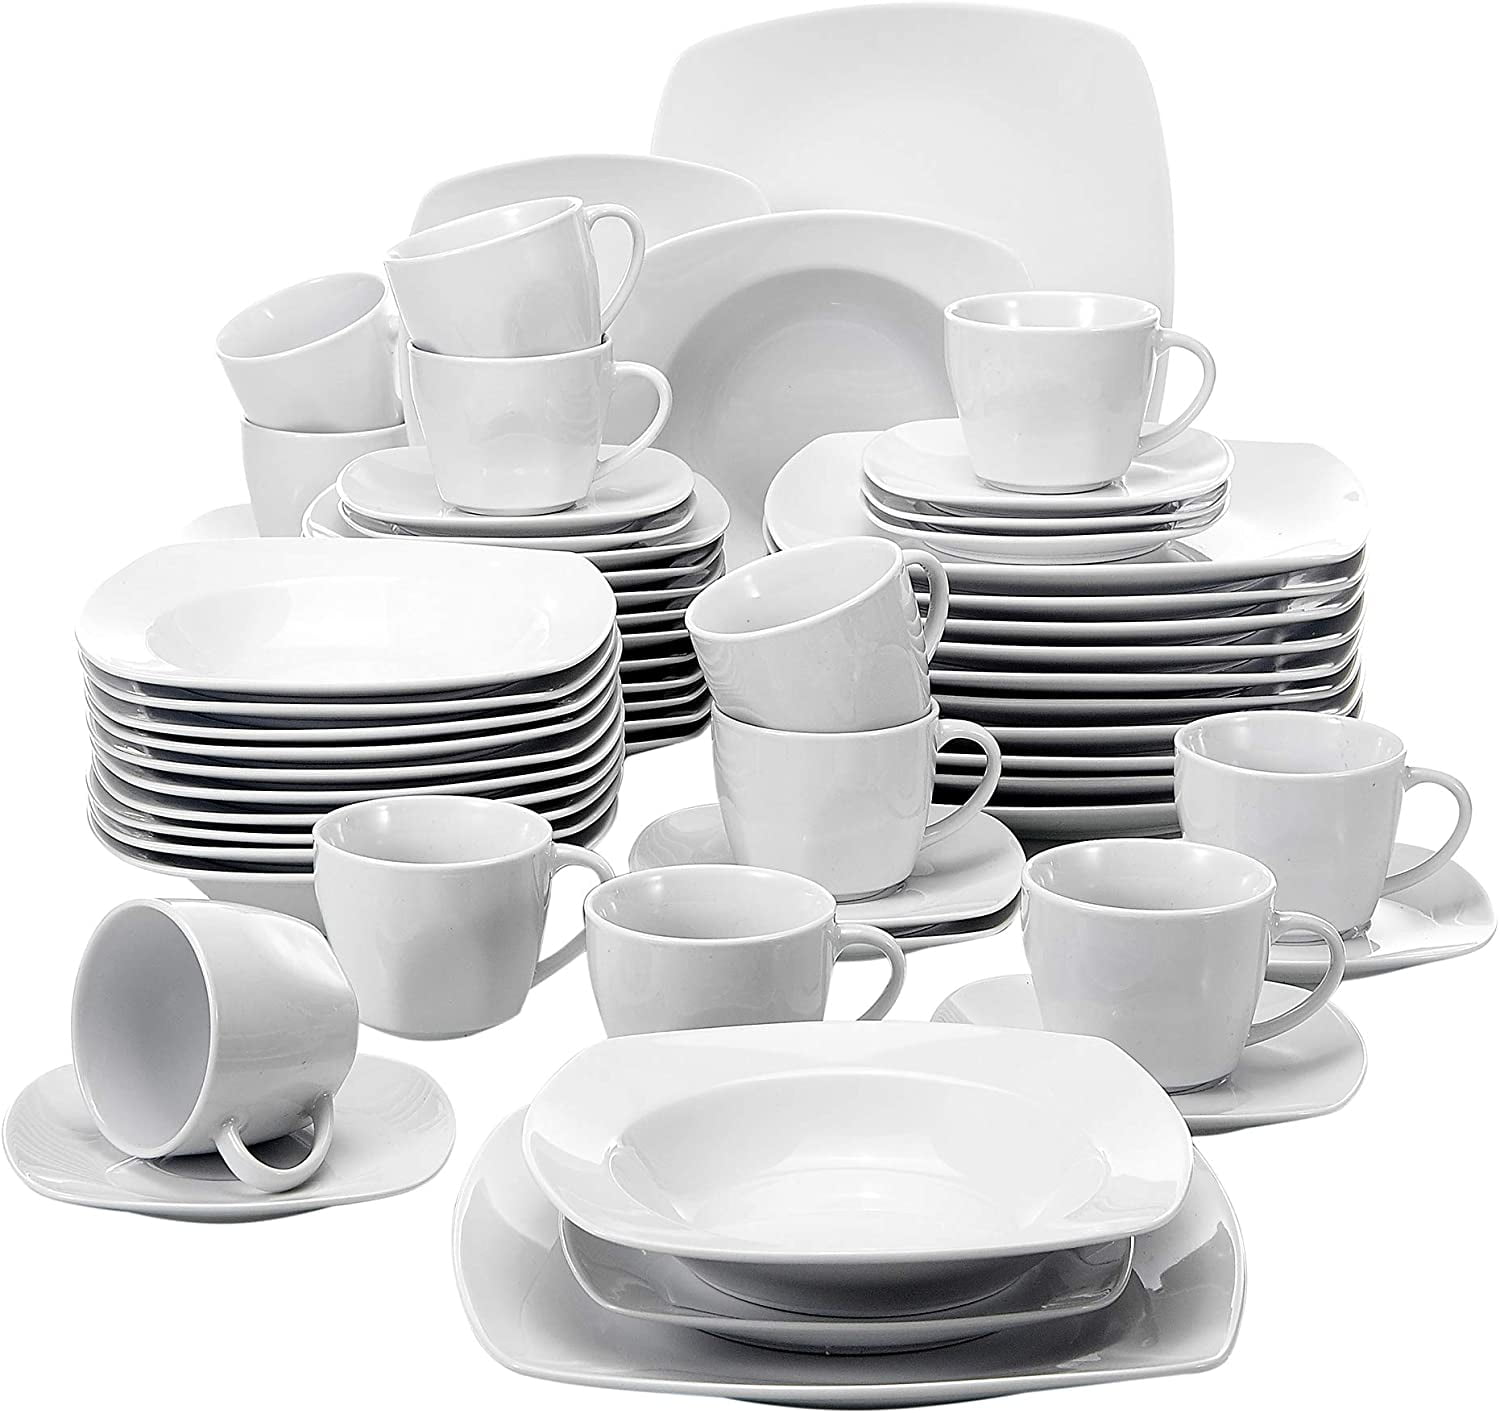 Series Elisa 100-Piece White Dinner Set with 12 Cups and 12 Saucers 12 Mugs 12 Egg Cups 12 Cereal Bowls 12 Dessert Plates 12 Soup Plates 12 Flat Plates MALACASA 